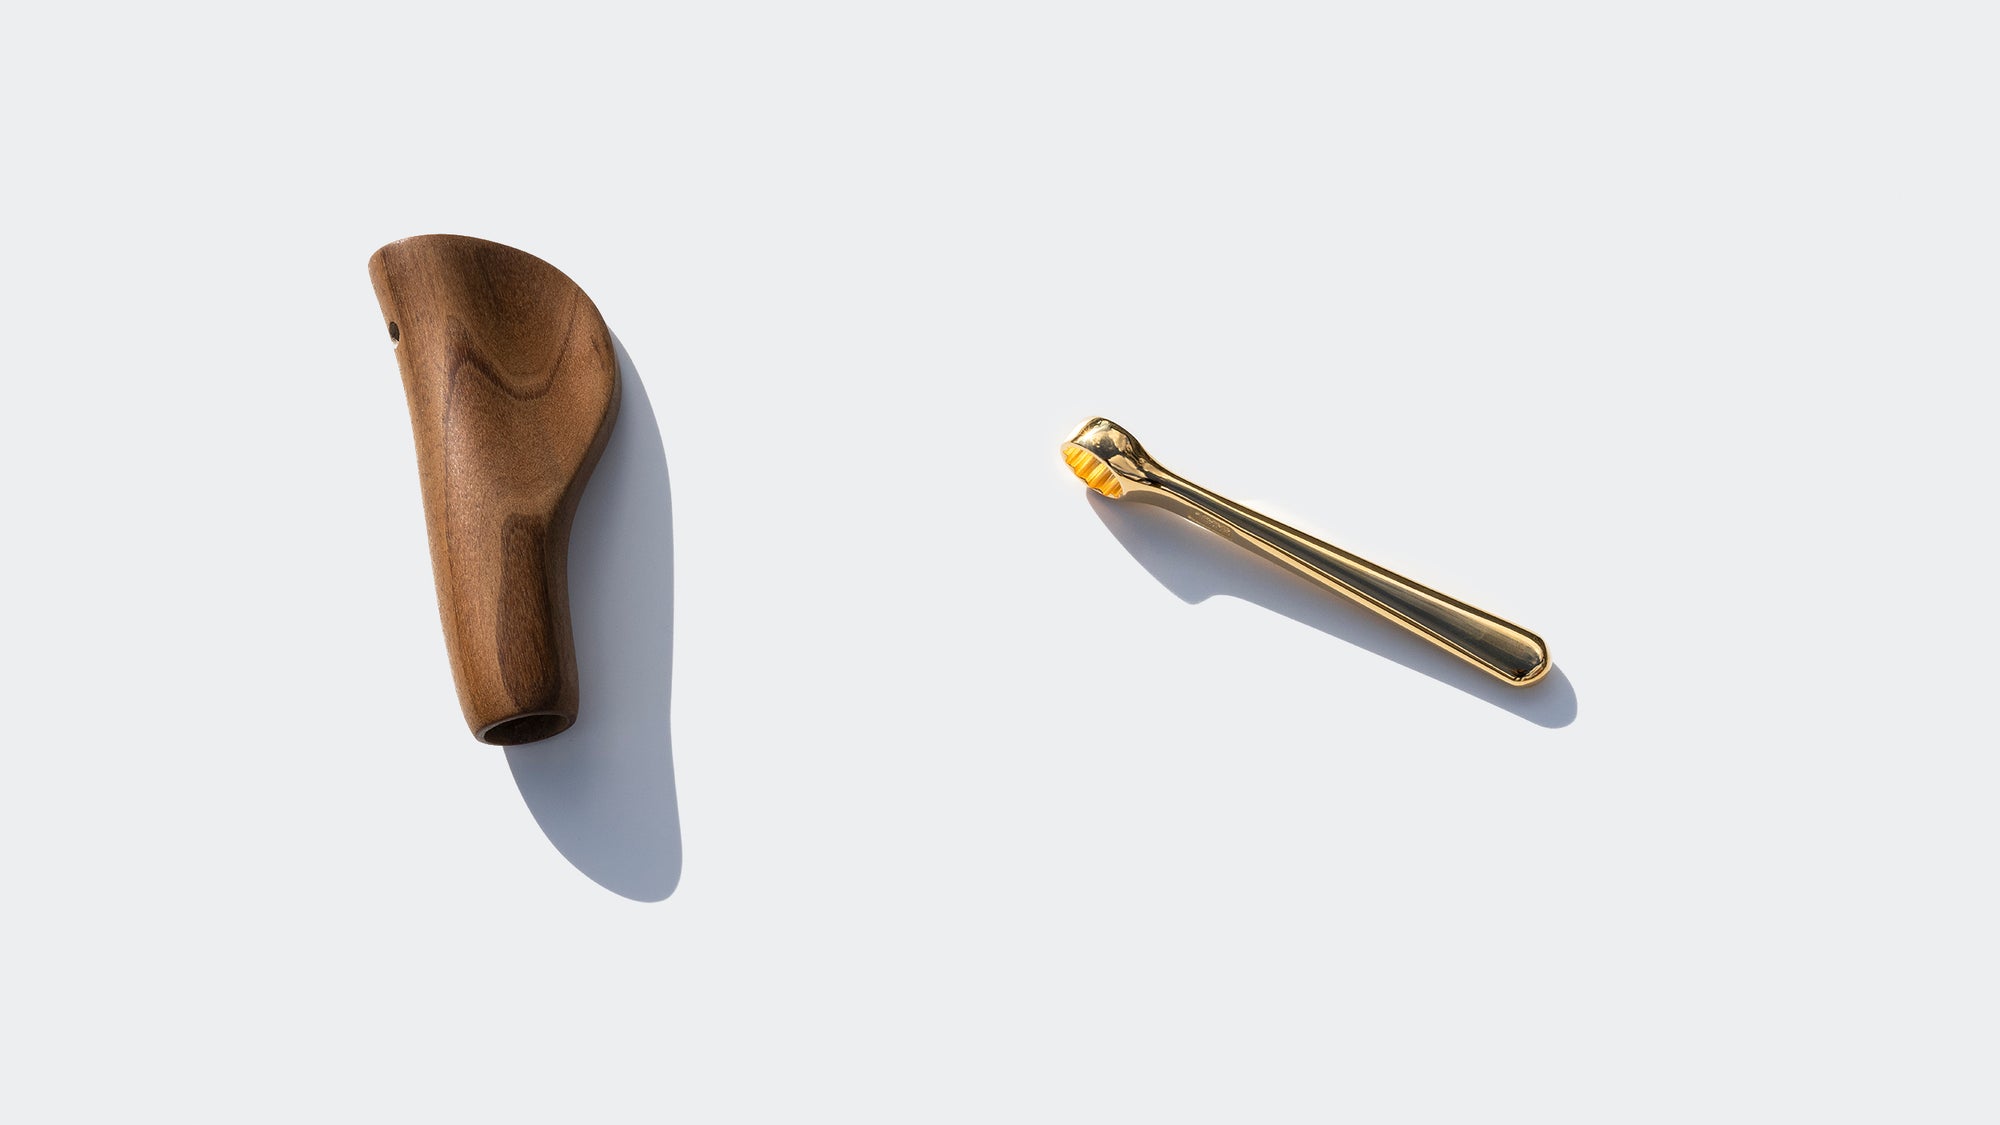 The world's most beautiful bicycle tools